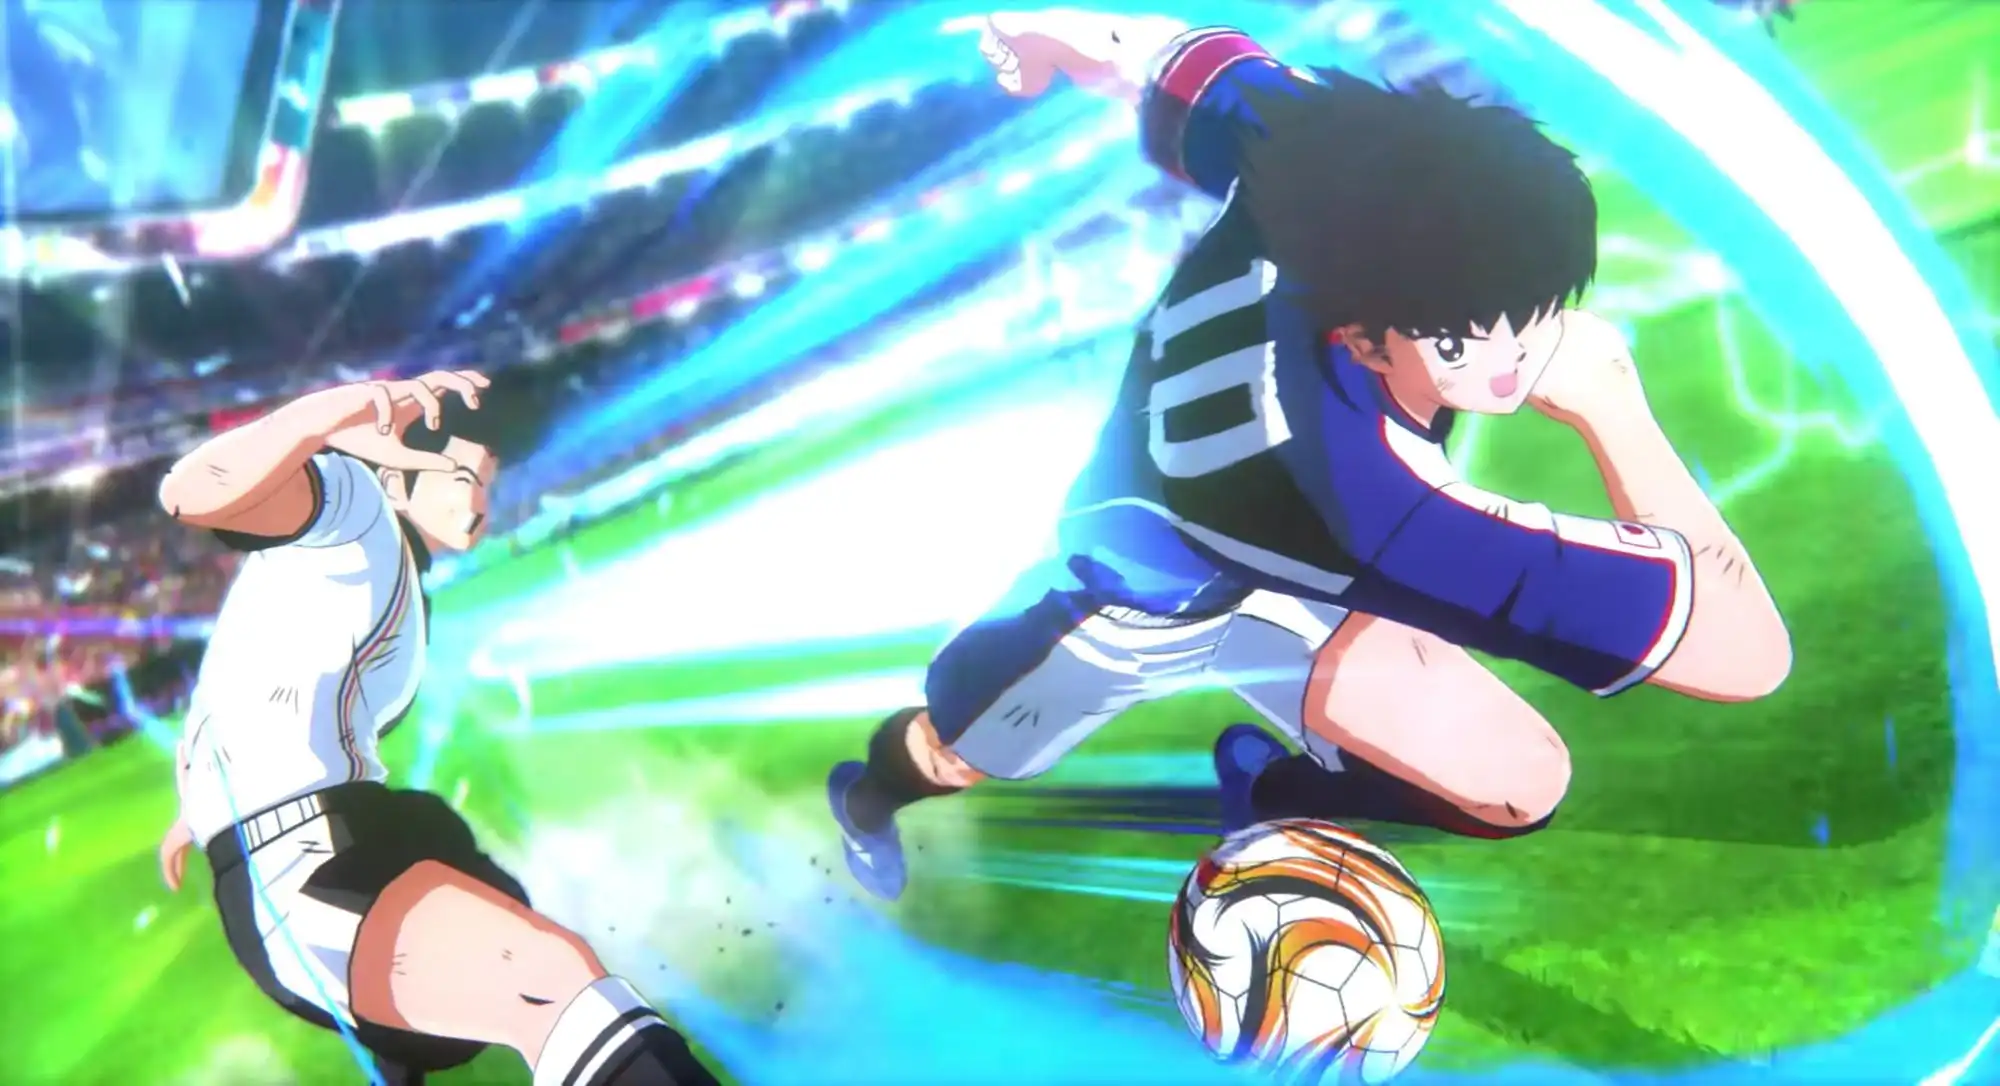 Captain Tsubasa's Newest Soccer Game! The High-Quality Soccer Game to Be  Released in 2020, With Visual Effects True to the Original Anime Series, Is  Driving Fans Wild! - Modern Culture｜COOL JAPAN VIDEOS｜A